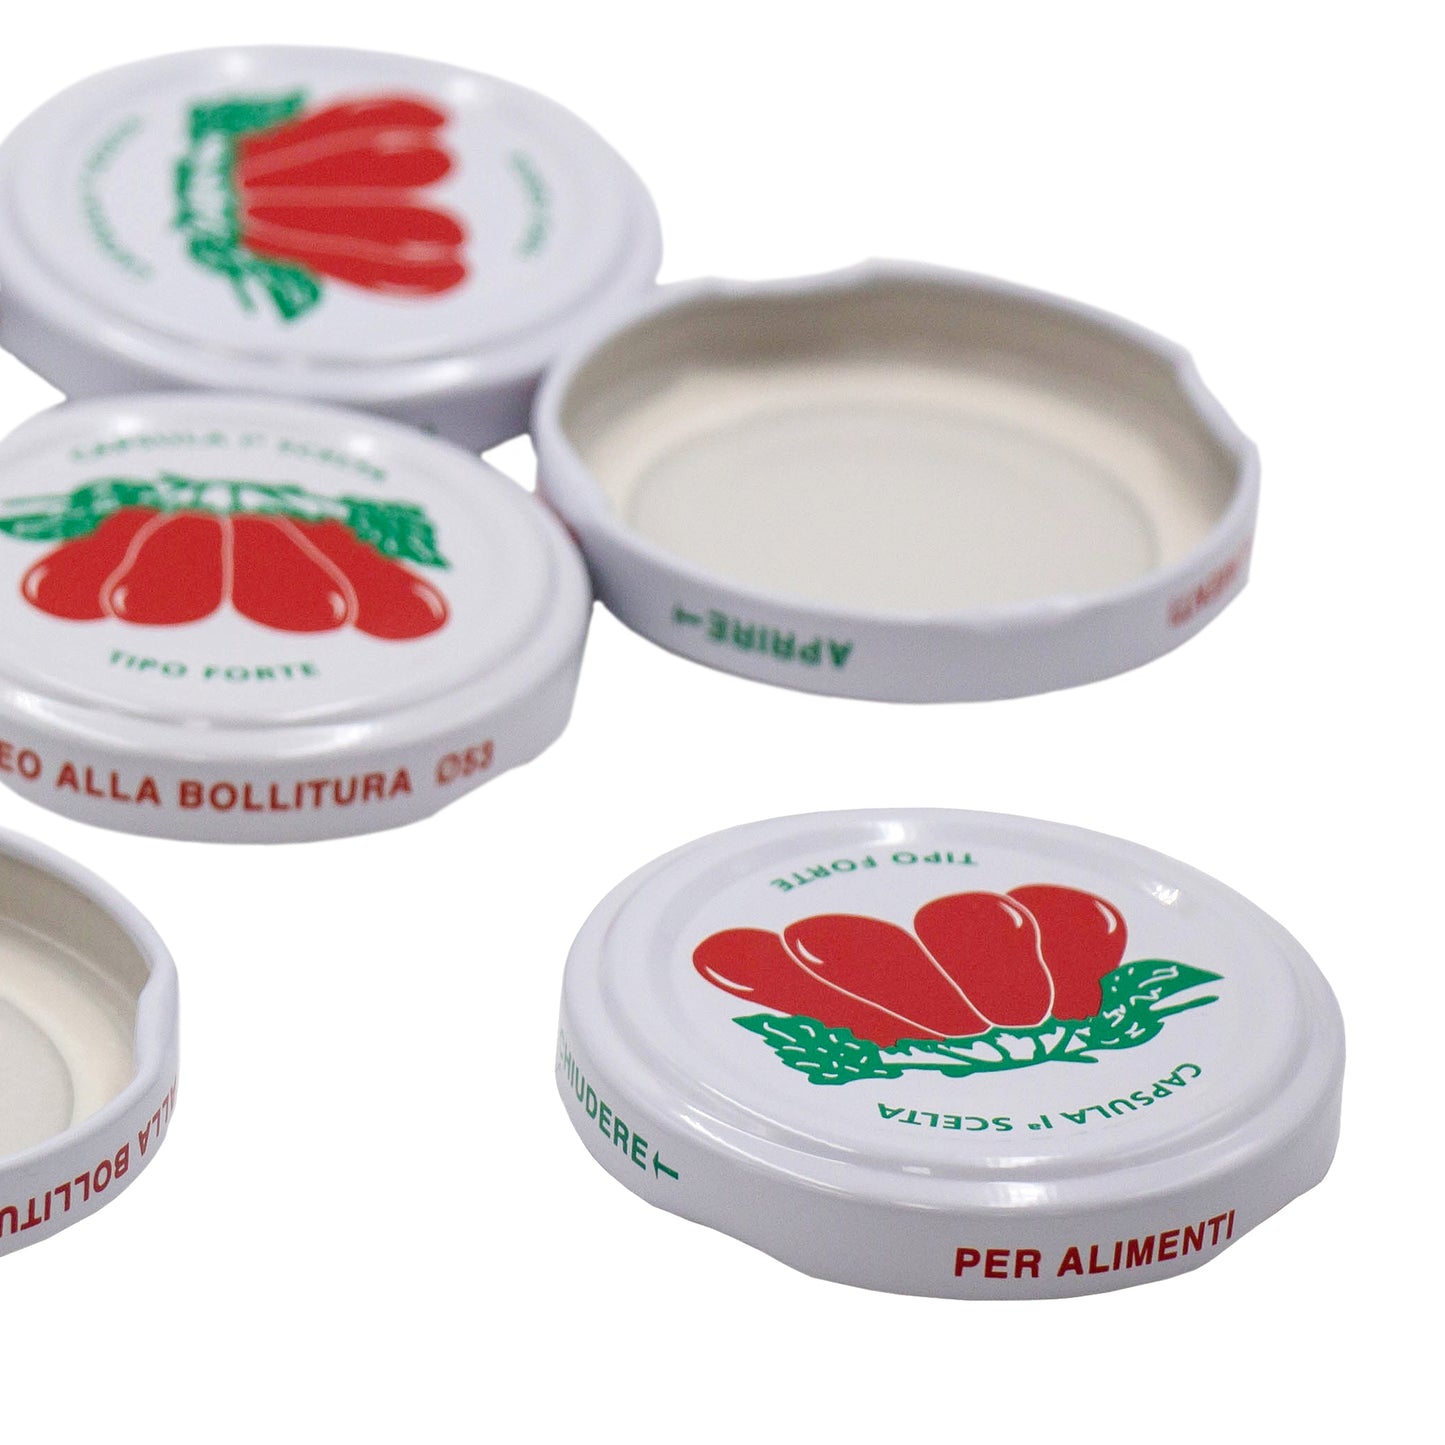 53mm metal lid with tomato print for the 1 litre passata jars. bag of 100 lids